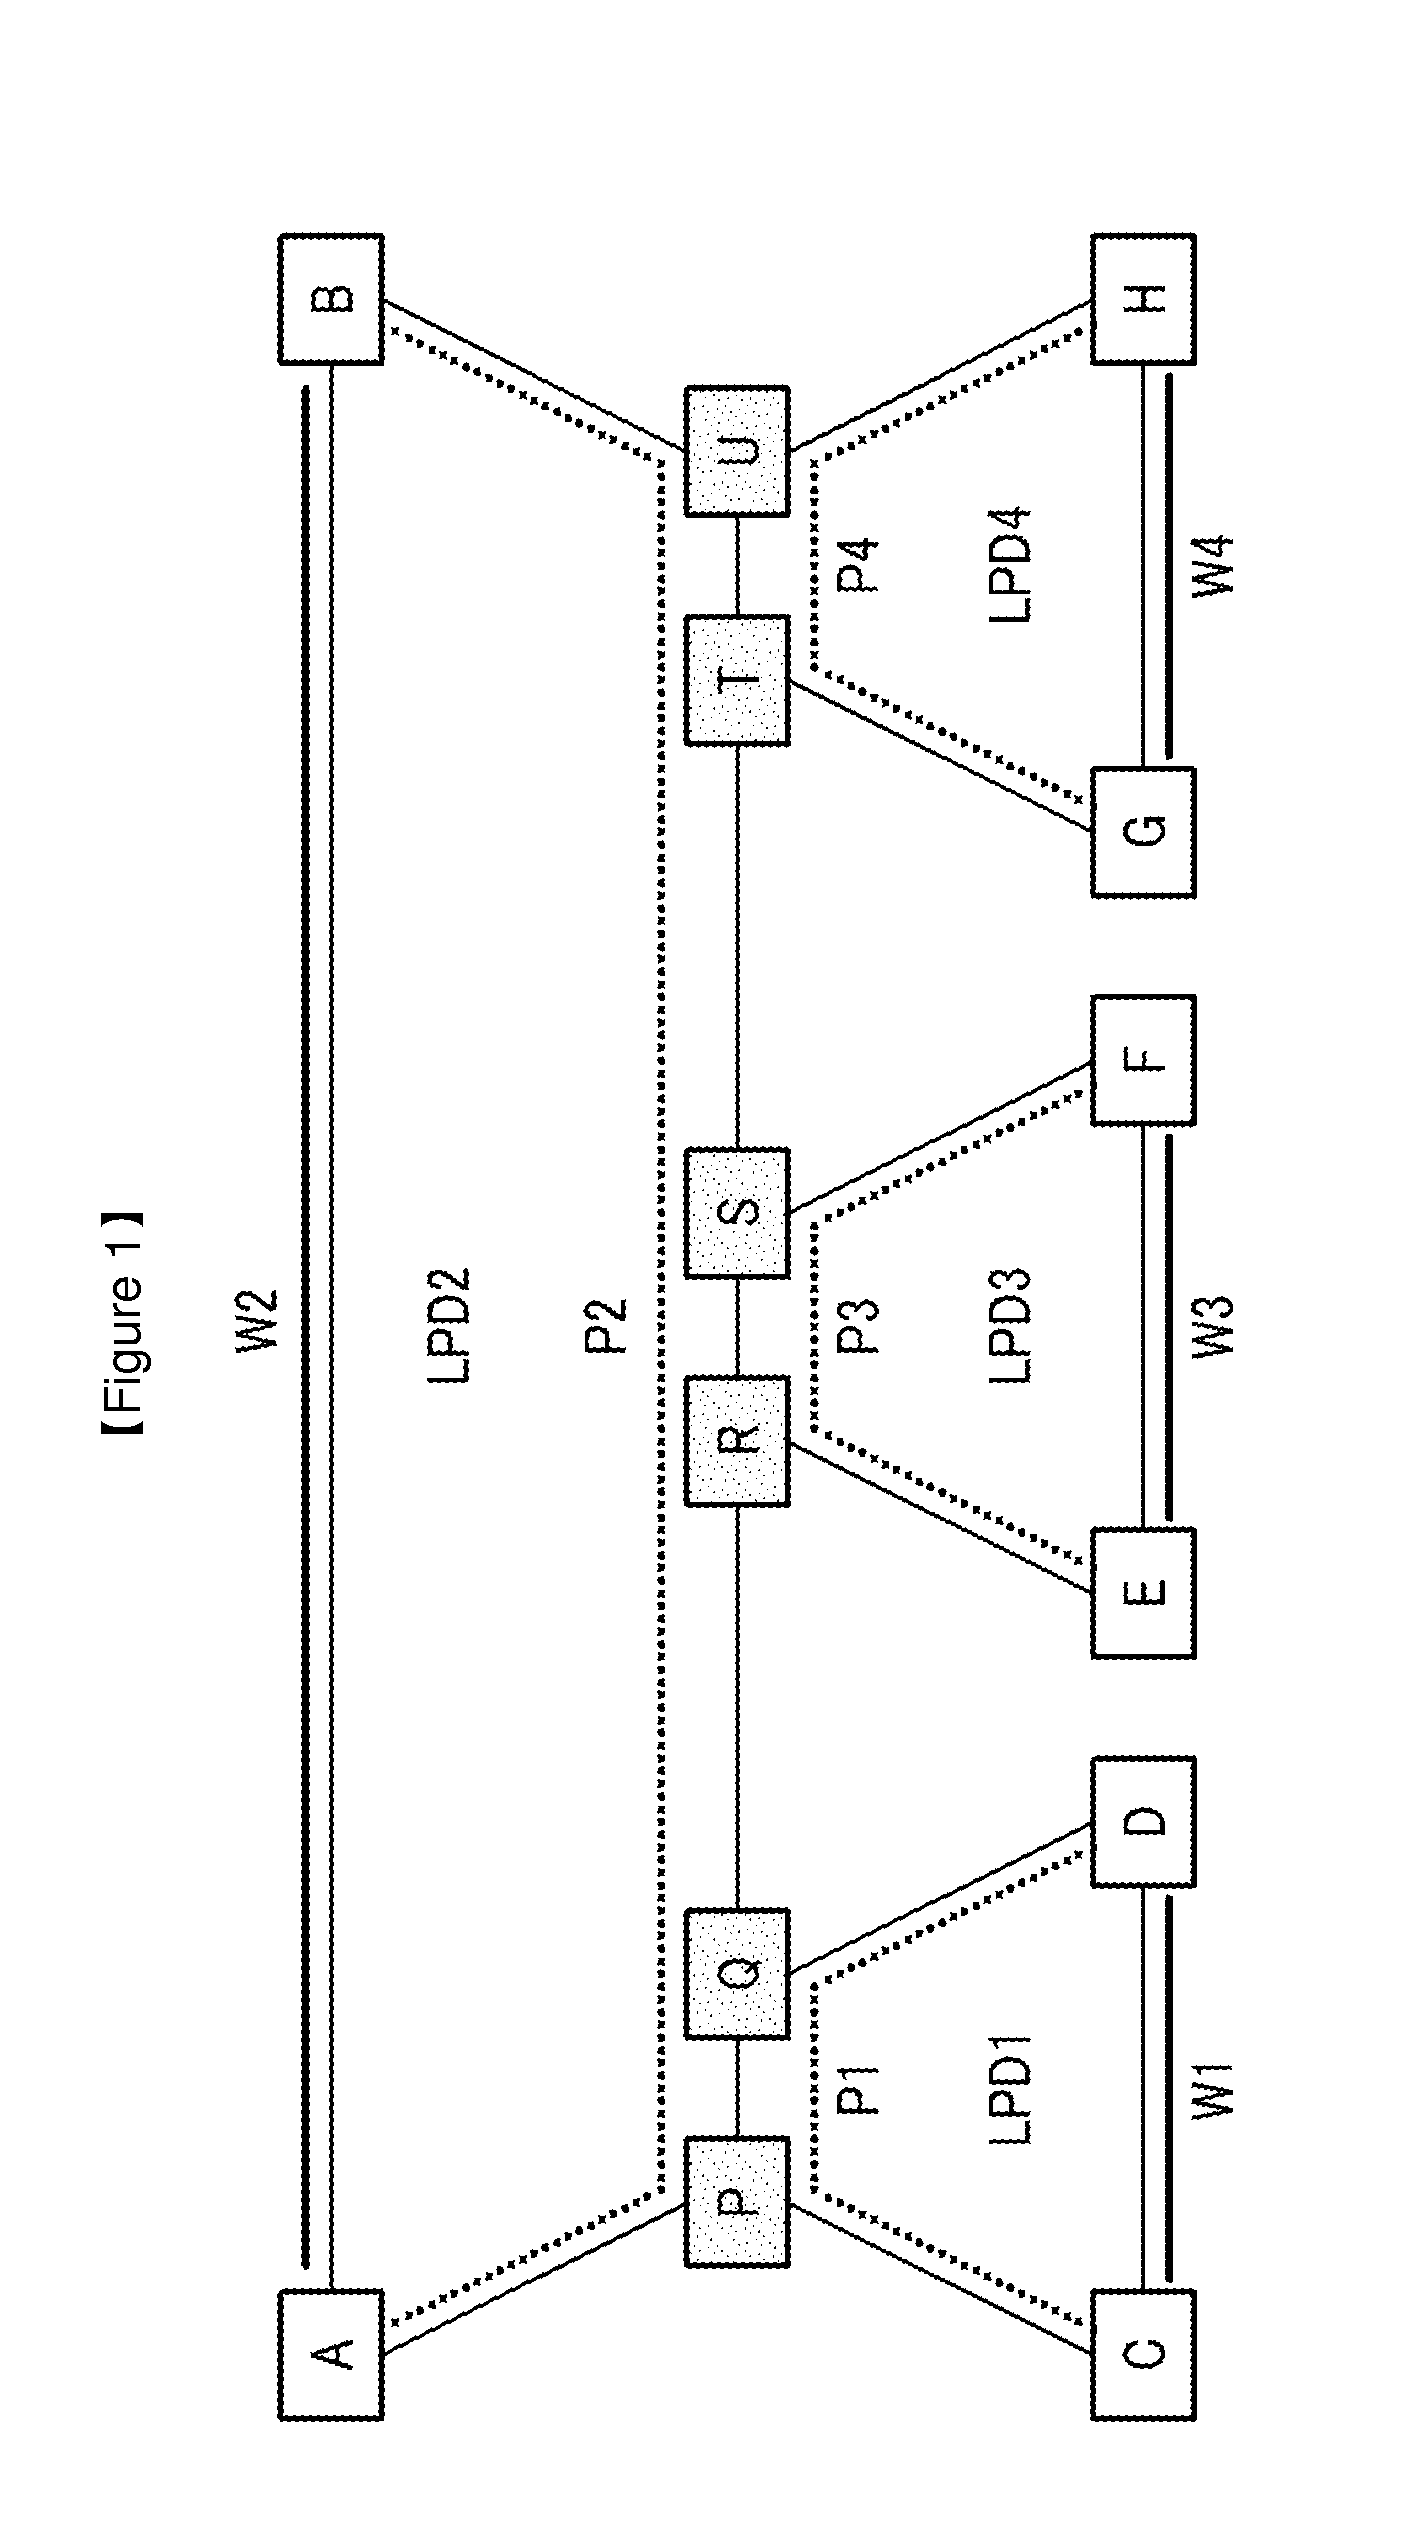 Method of performing shared mesh protection switching